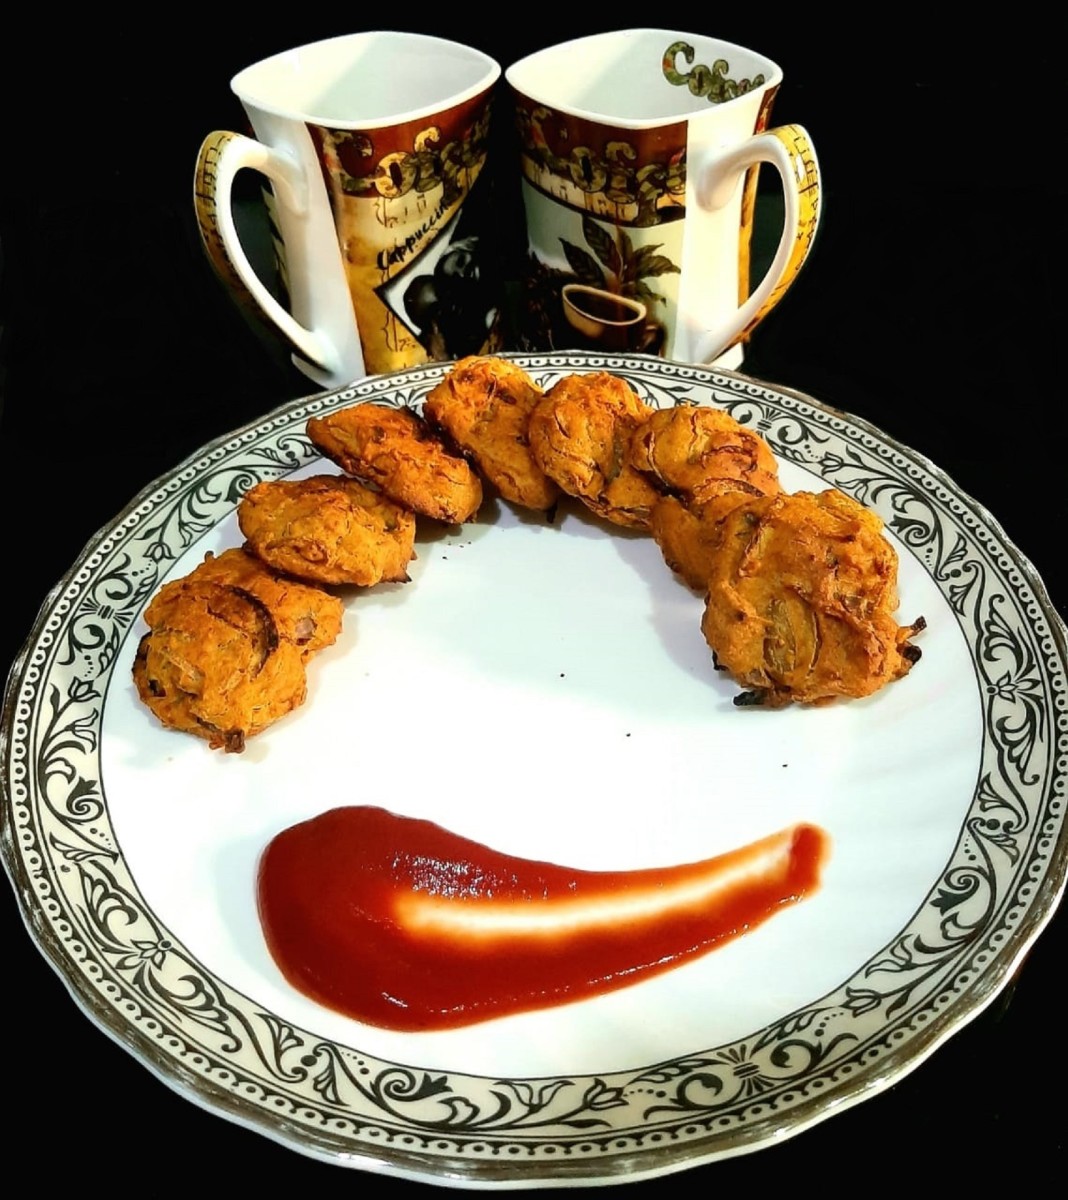 Yummy pakoras with a hot beverage